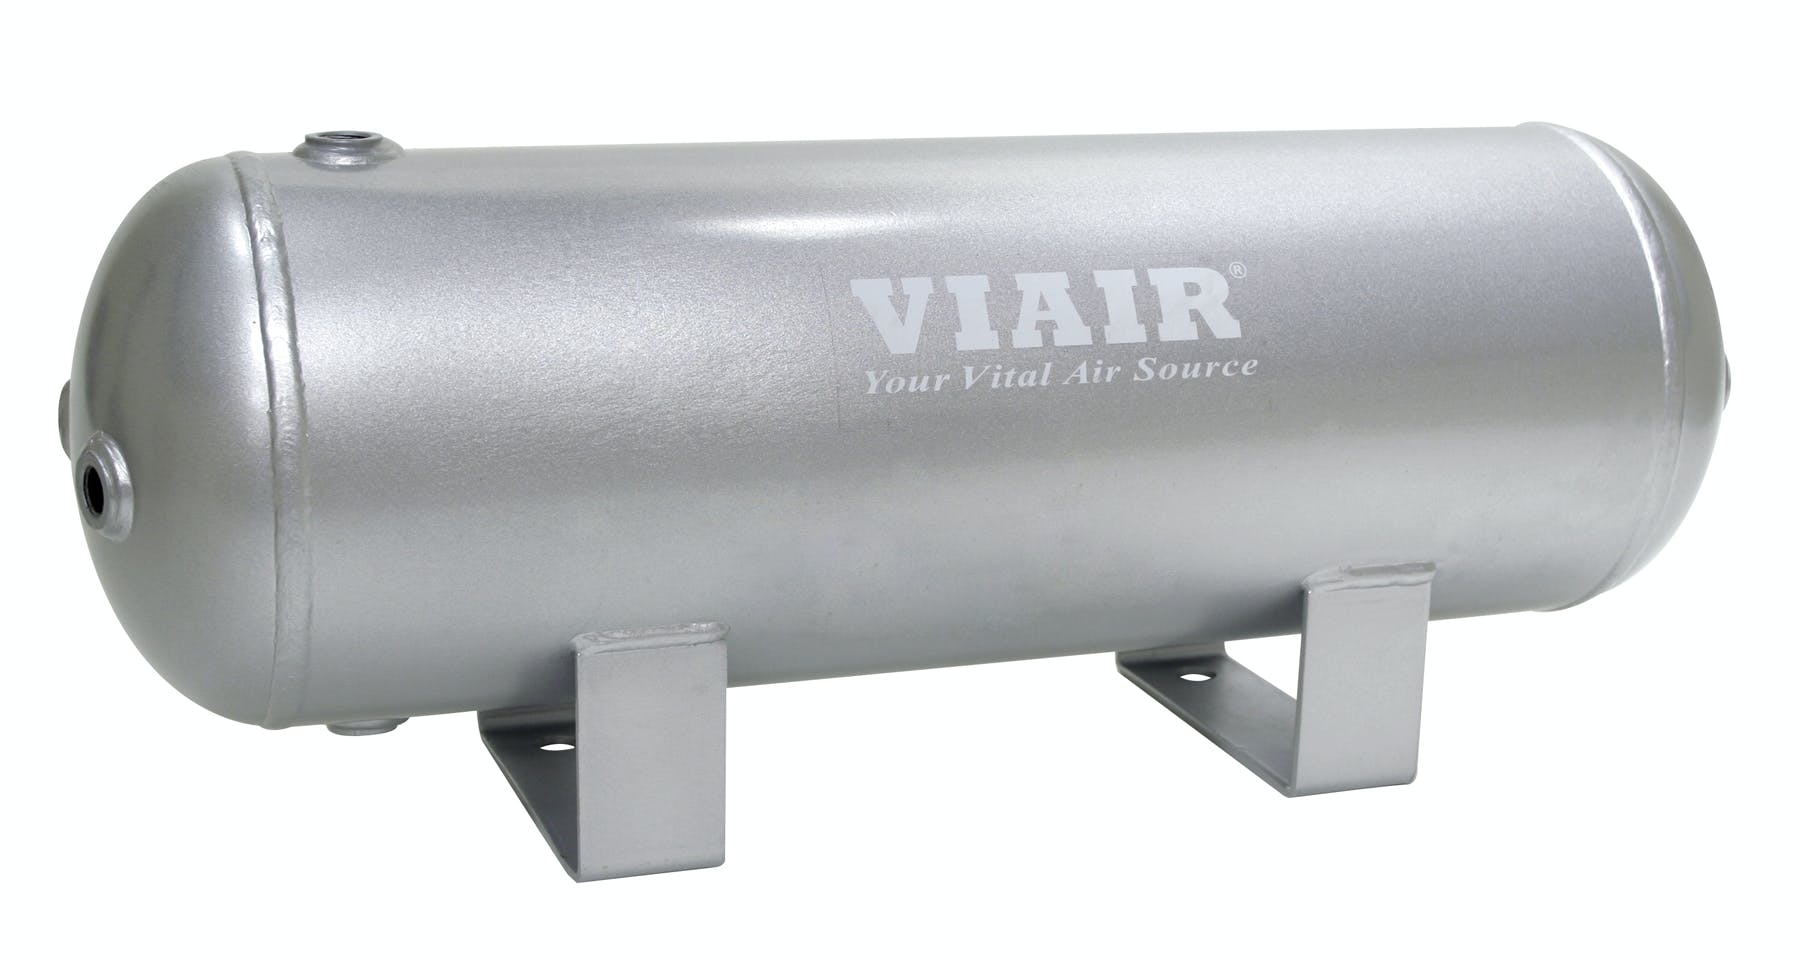 VIAIR 91022 2.0 Gallon Tank  Six 1/4in NPT Ports  150 psi Rated